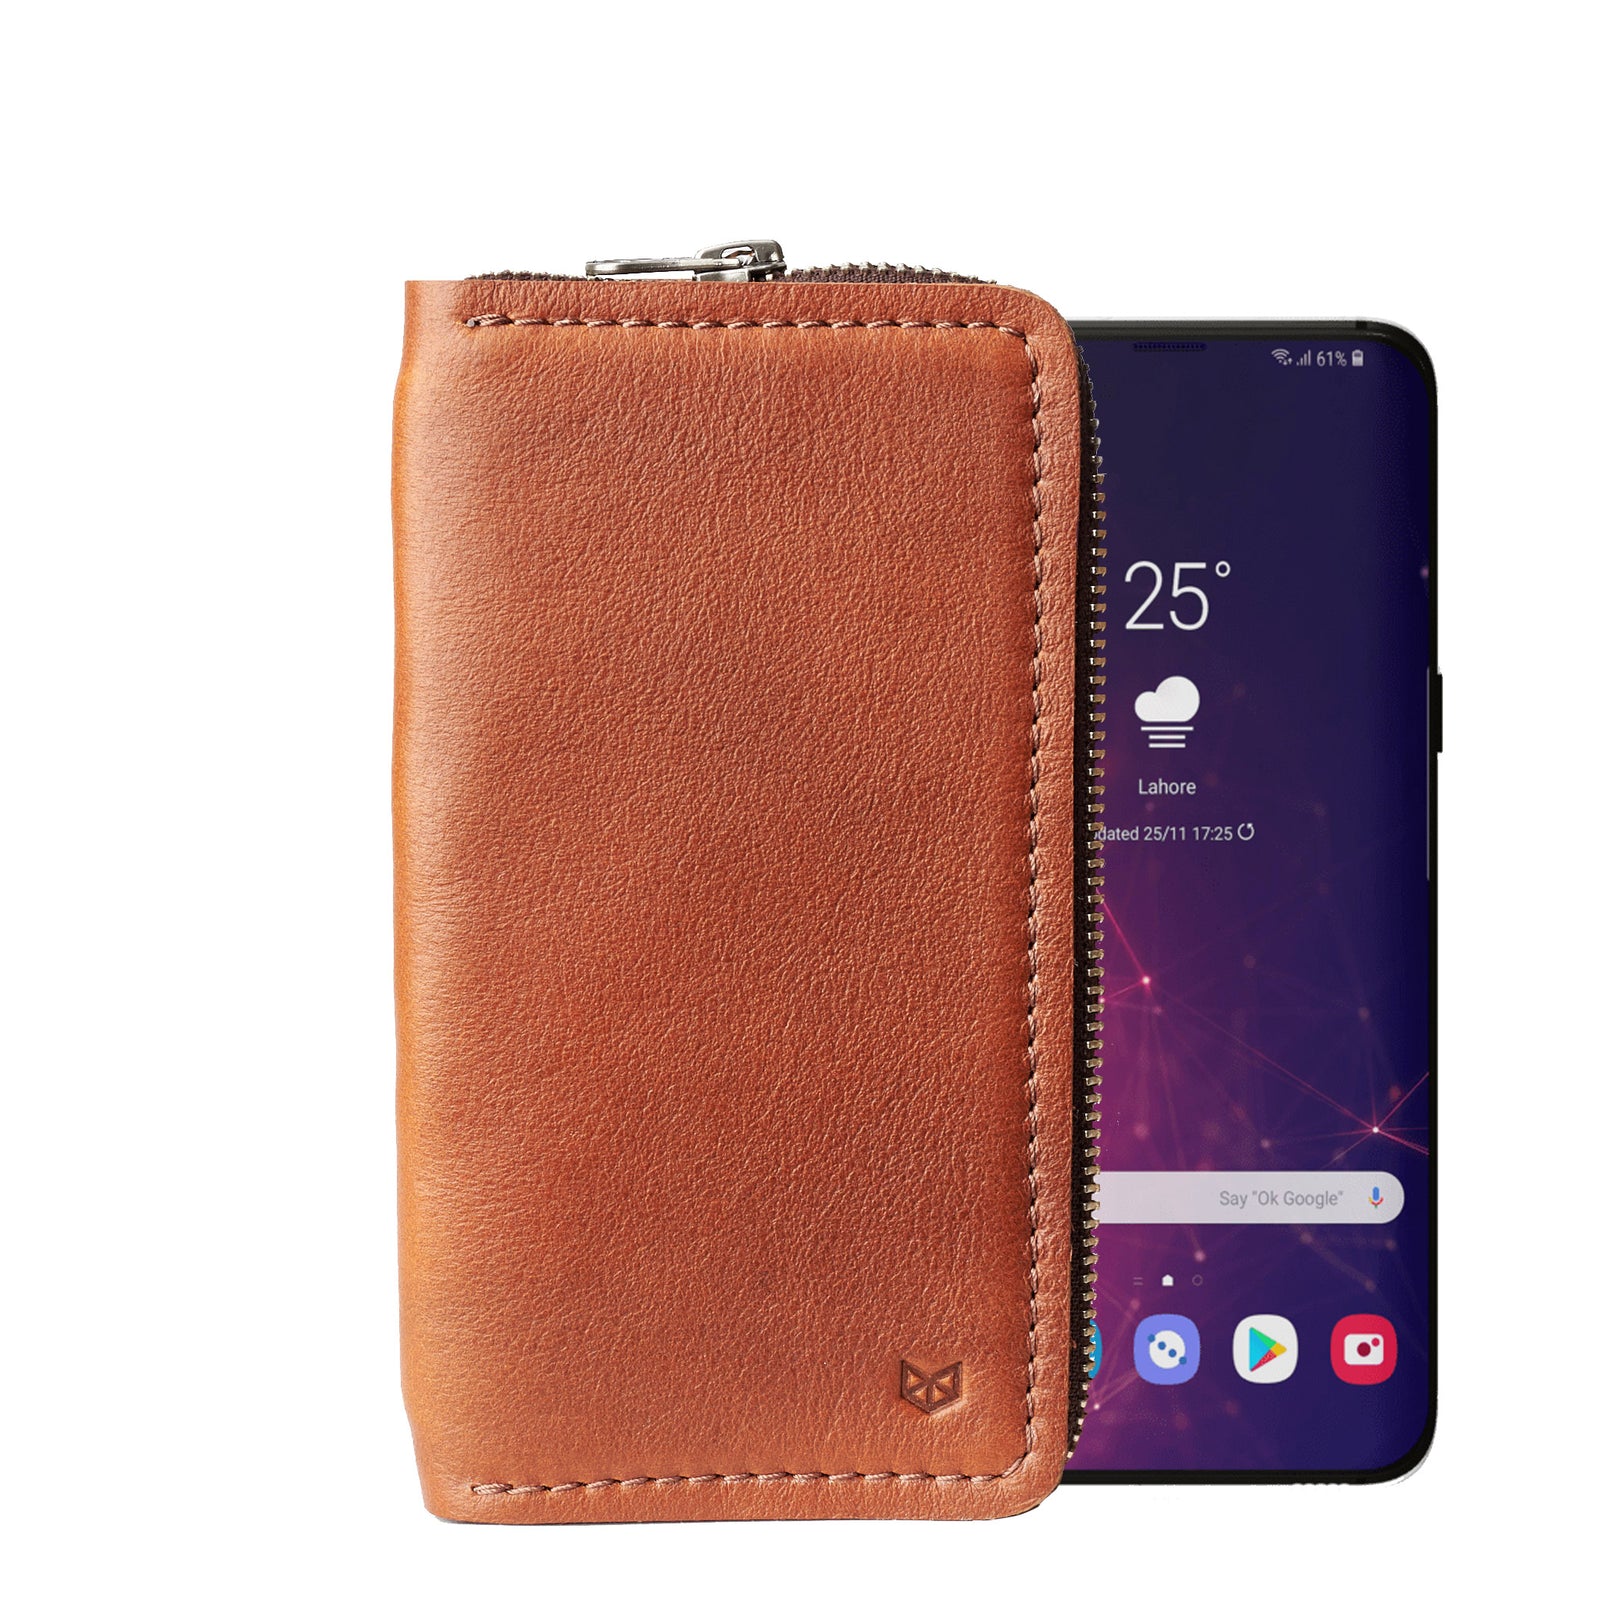 Samsung cover. Tan handcrafted leather stand case for the Samsung Galaxy S8 and S8 Plus, Samsung Galaxy S9 and S9 Plus, Samsung Galaxy S10 and S10 Plus .  Samsung sleeve wallet with card holder. Crafted by Capra Leather.